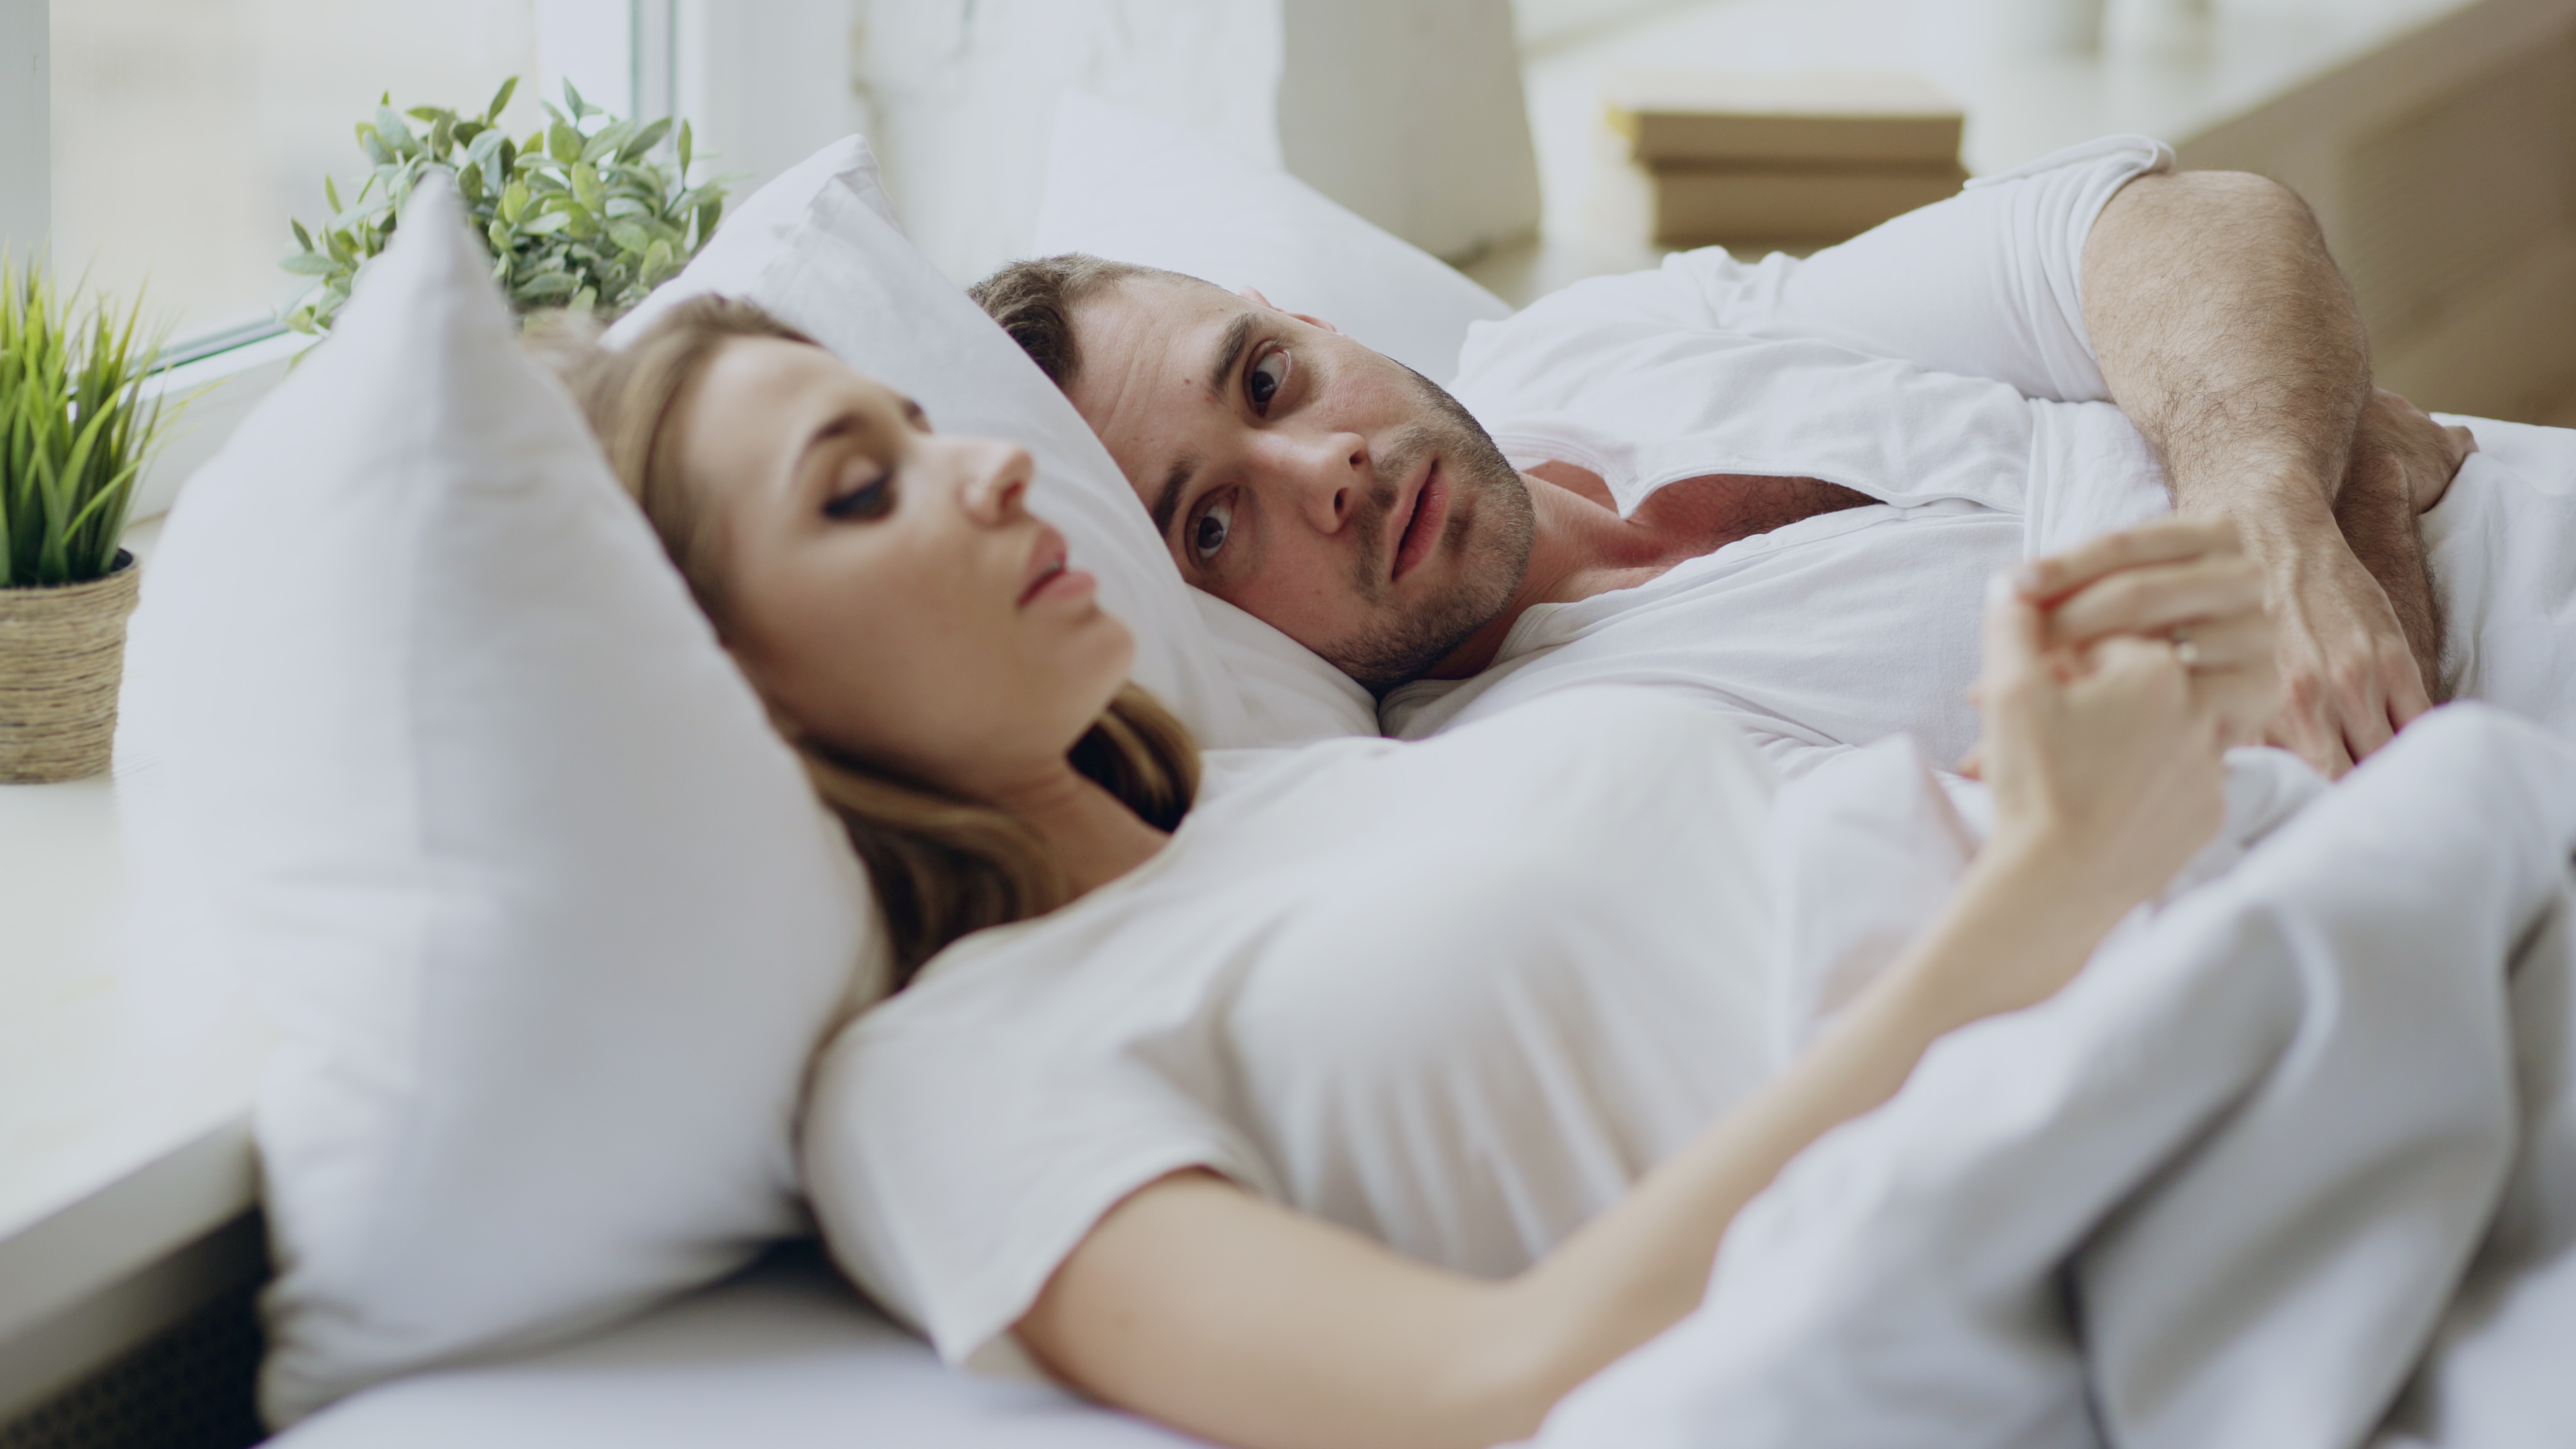 A couple having a conversation in bed | Source: Shutterstock